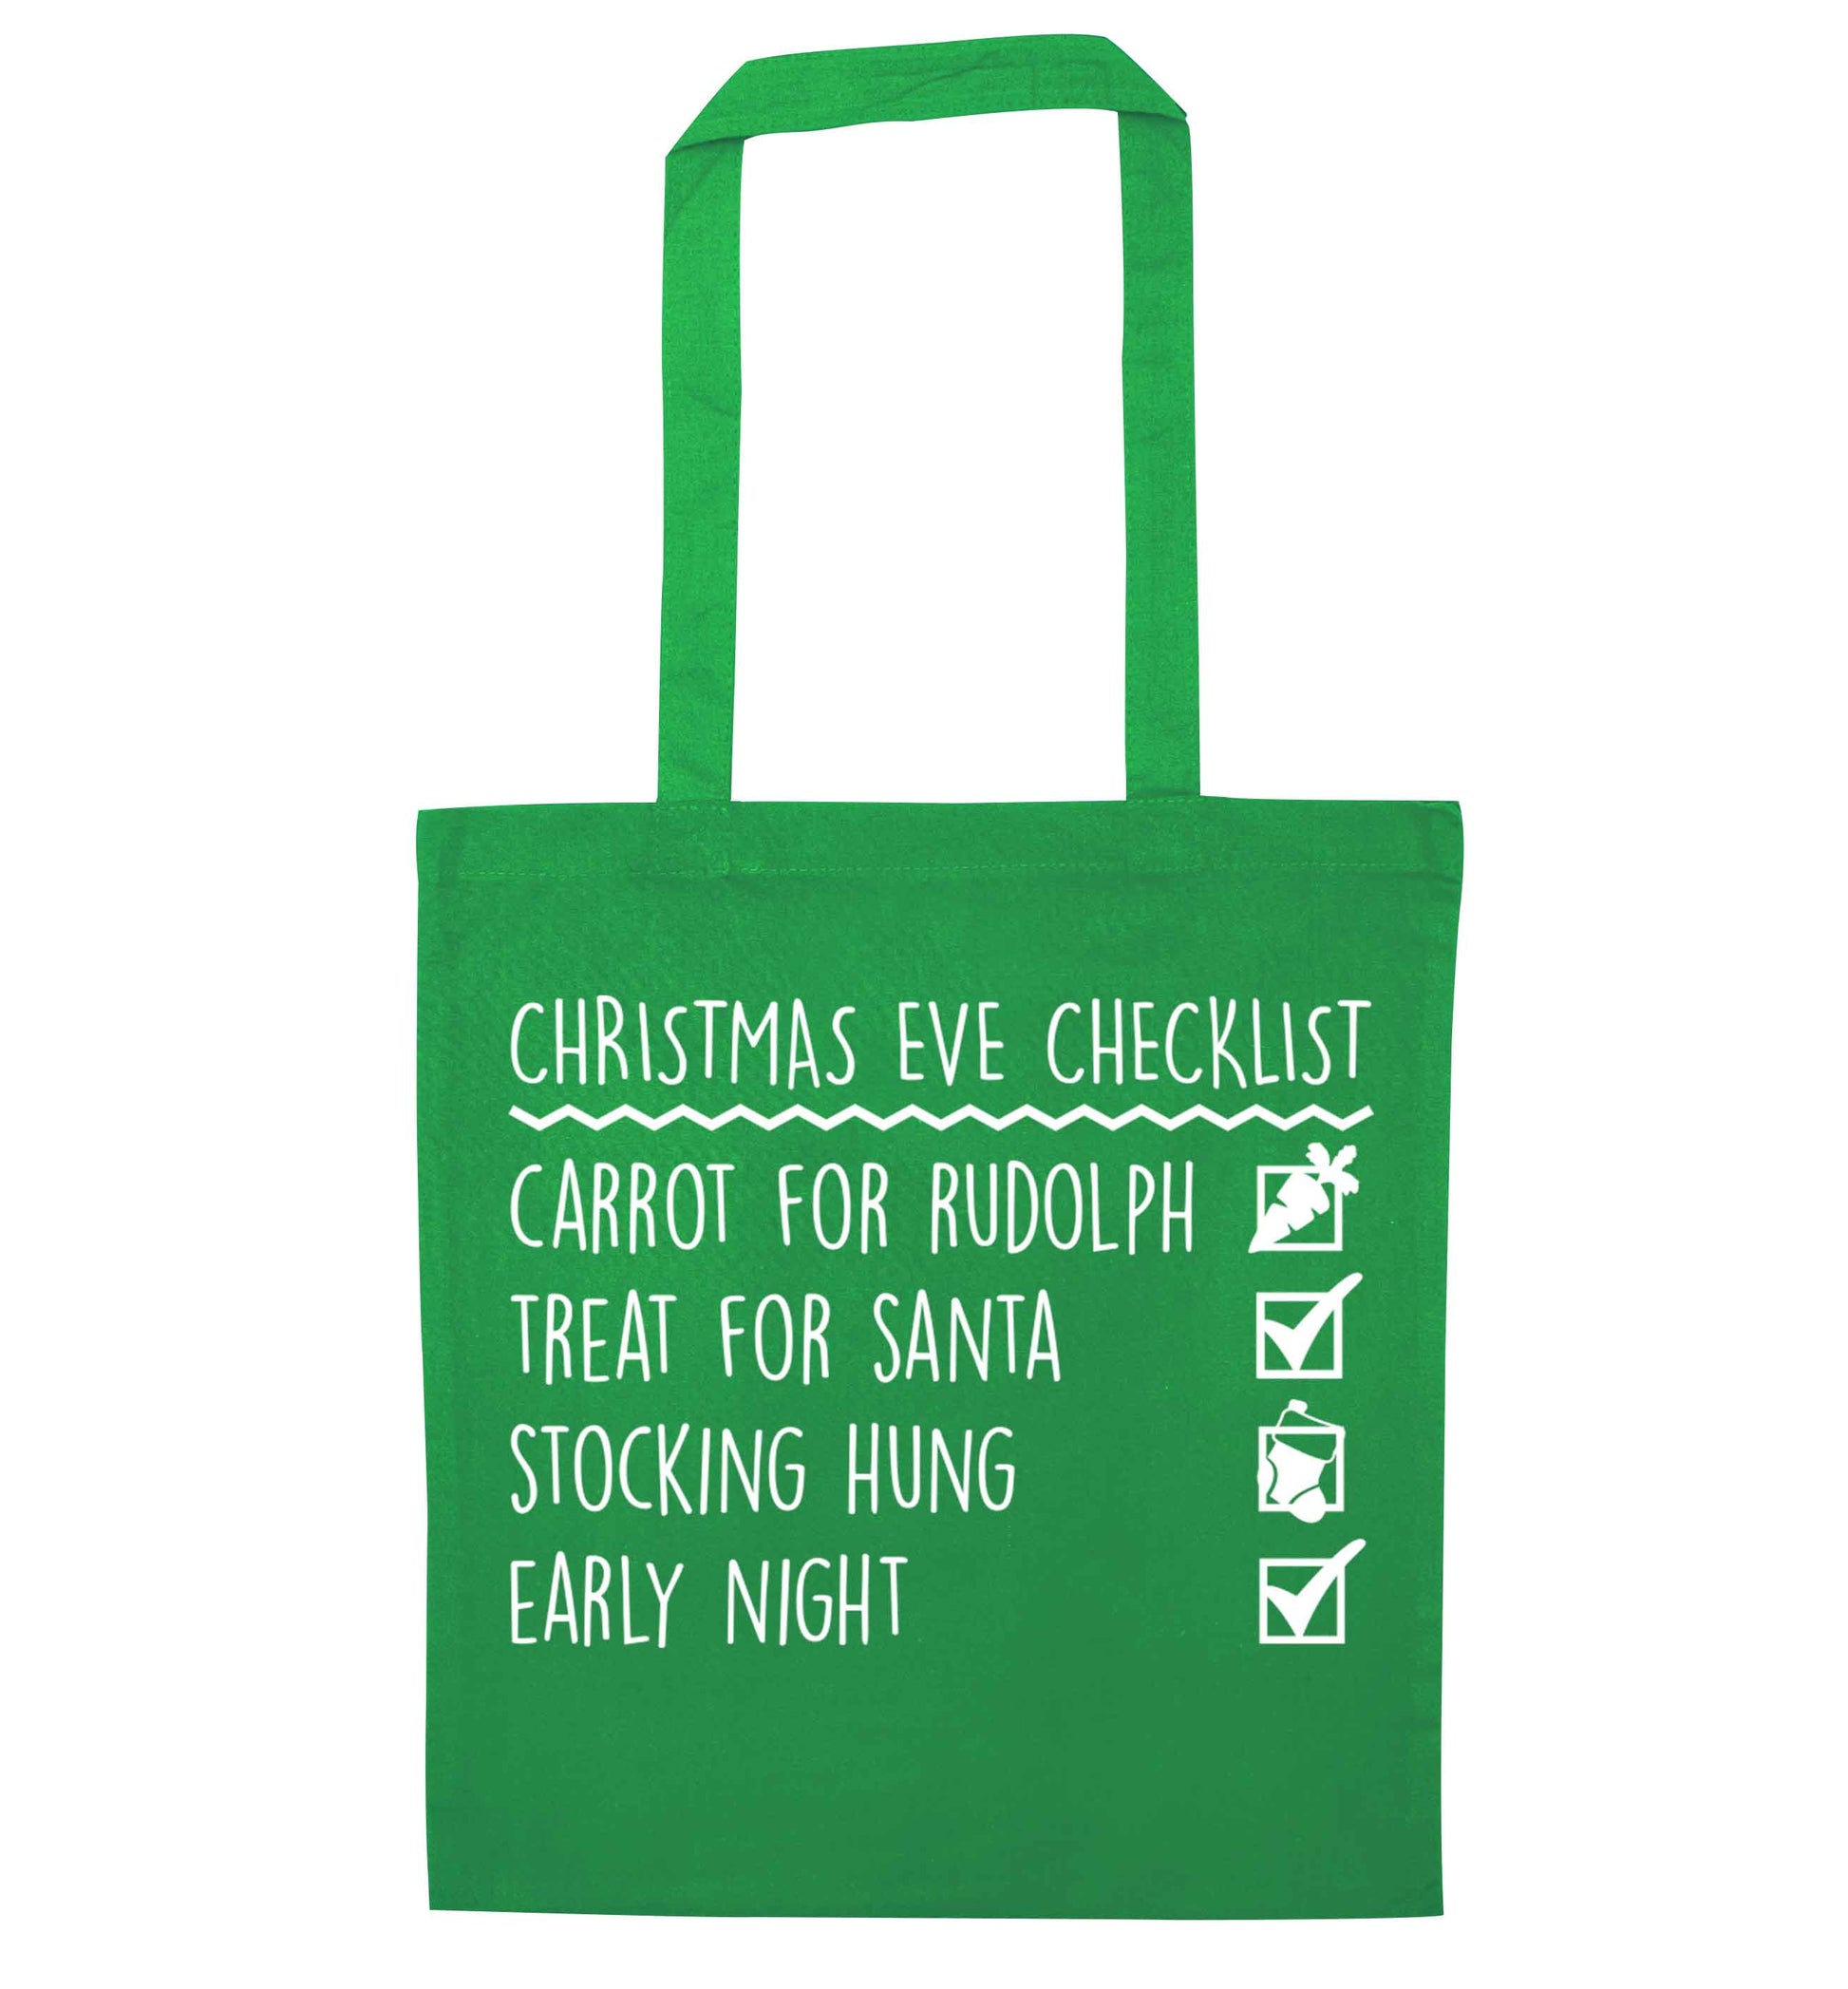 Candy Canes Candy Corns green tote bag